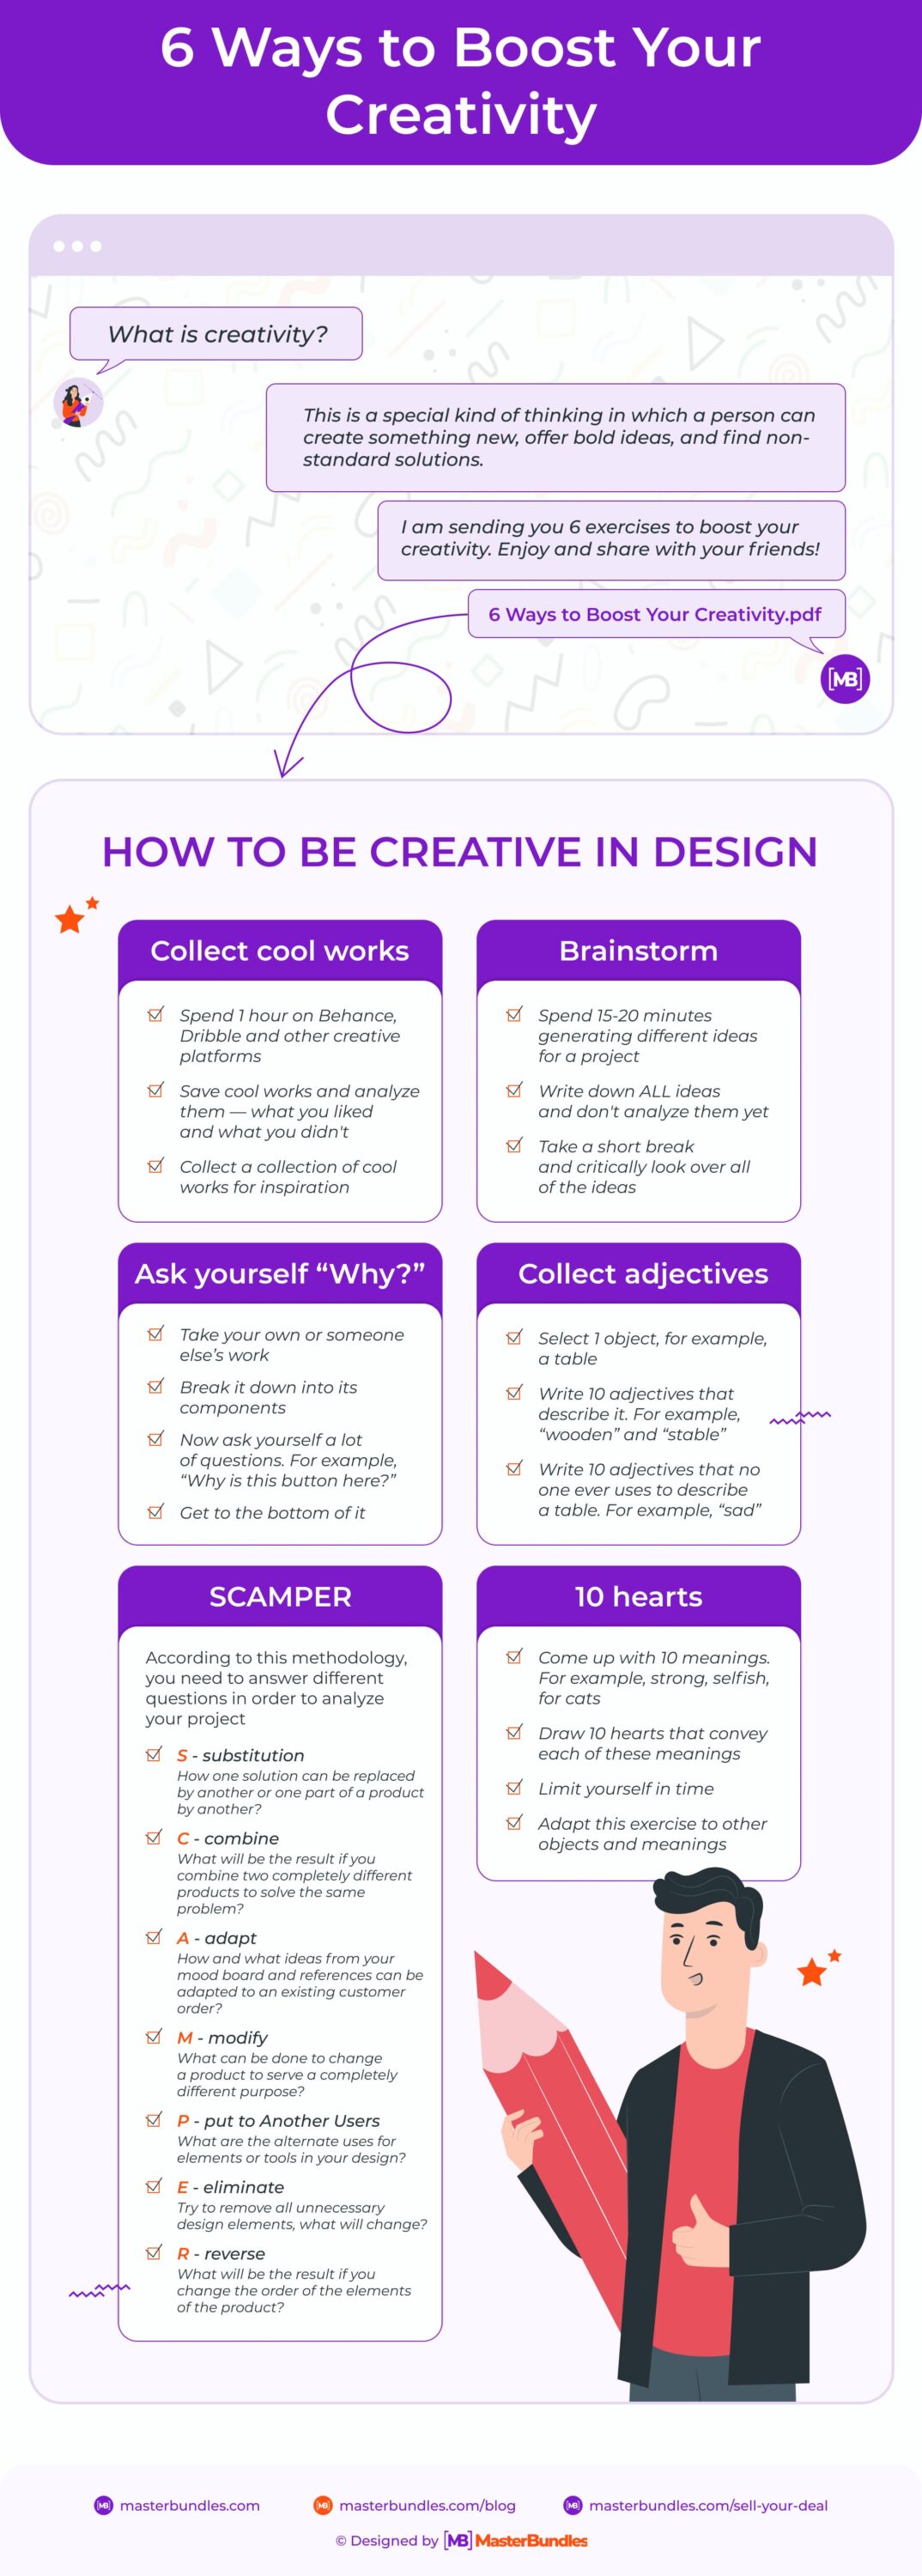 6 Ways to Boost Creativity in Infographic.